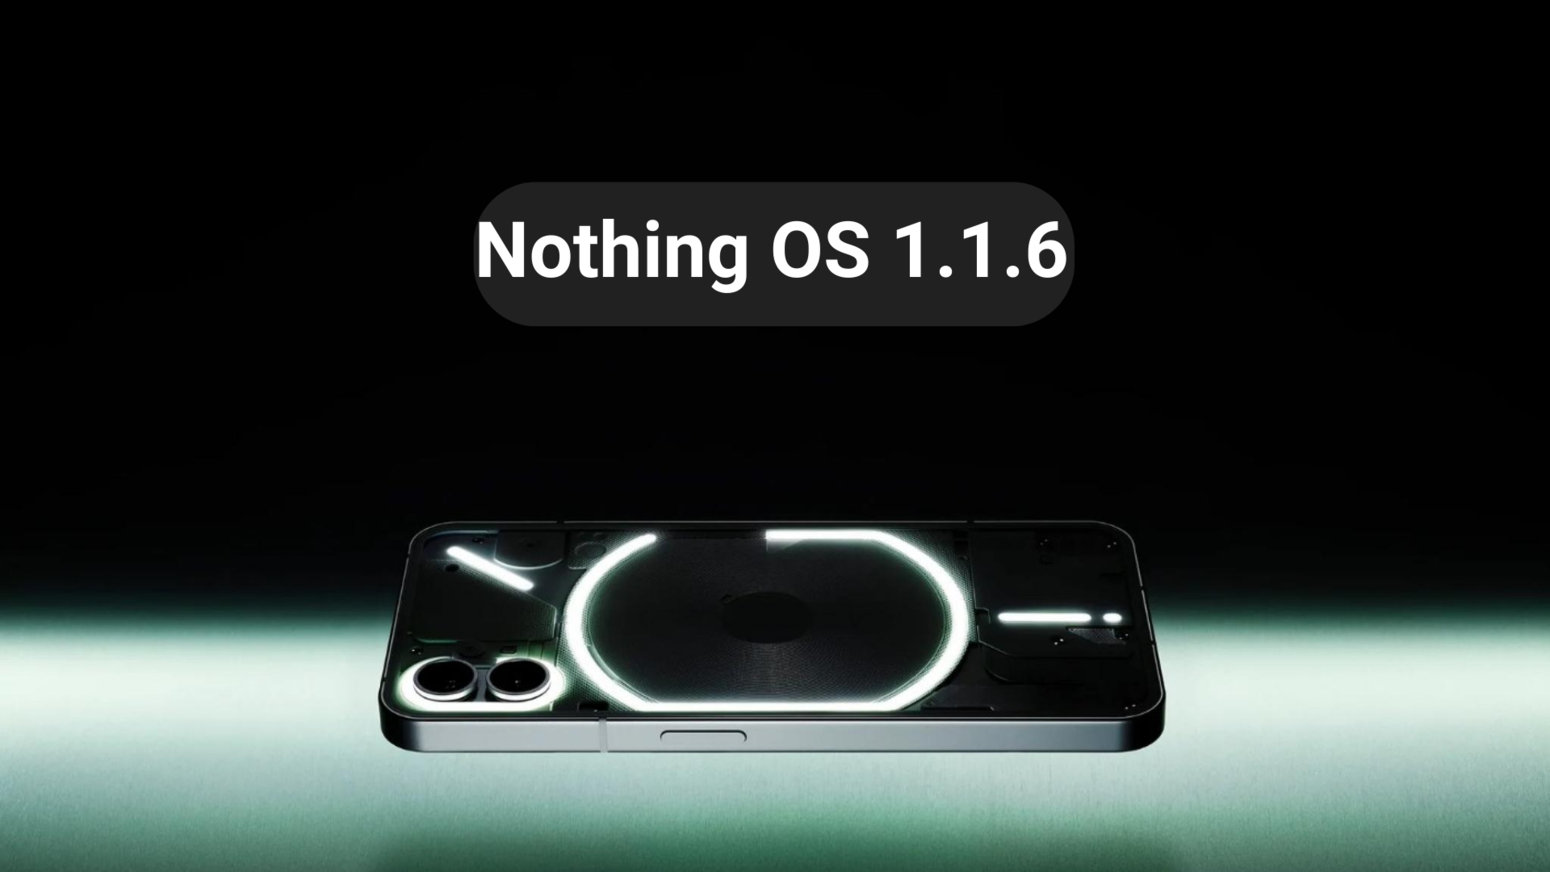 Download Nothing OS 1.1.6 Update for Nothing Phone